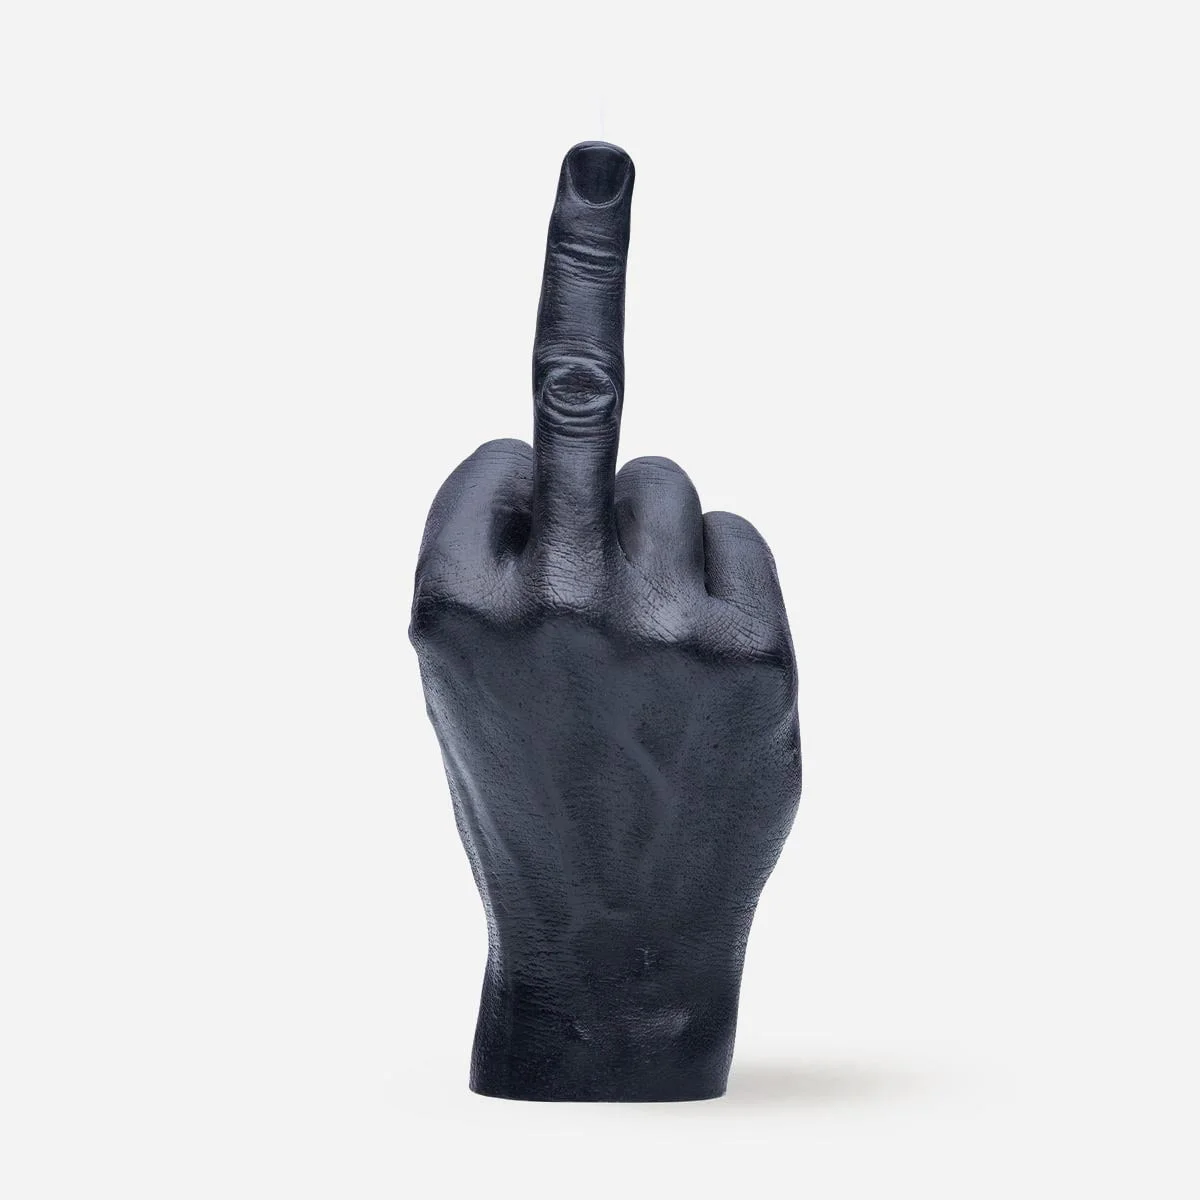 Candlehand F*ck You Gesture Candle - Black